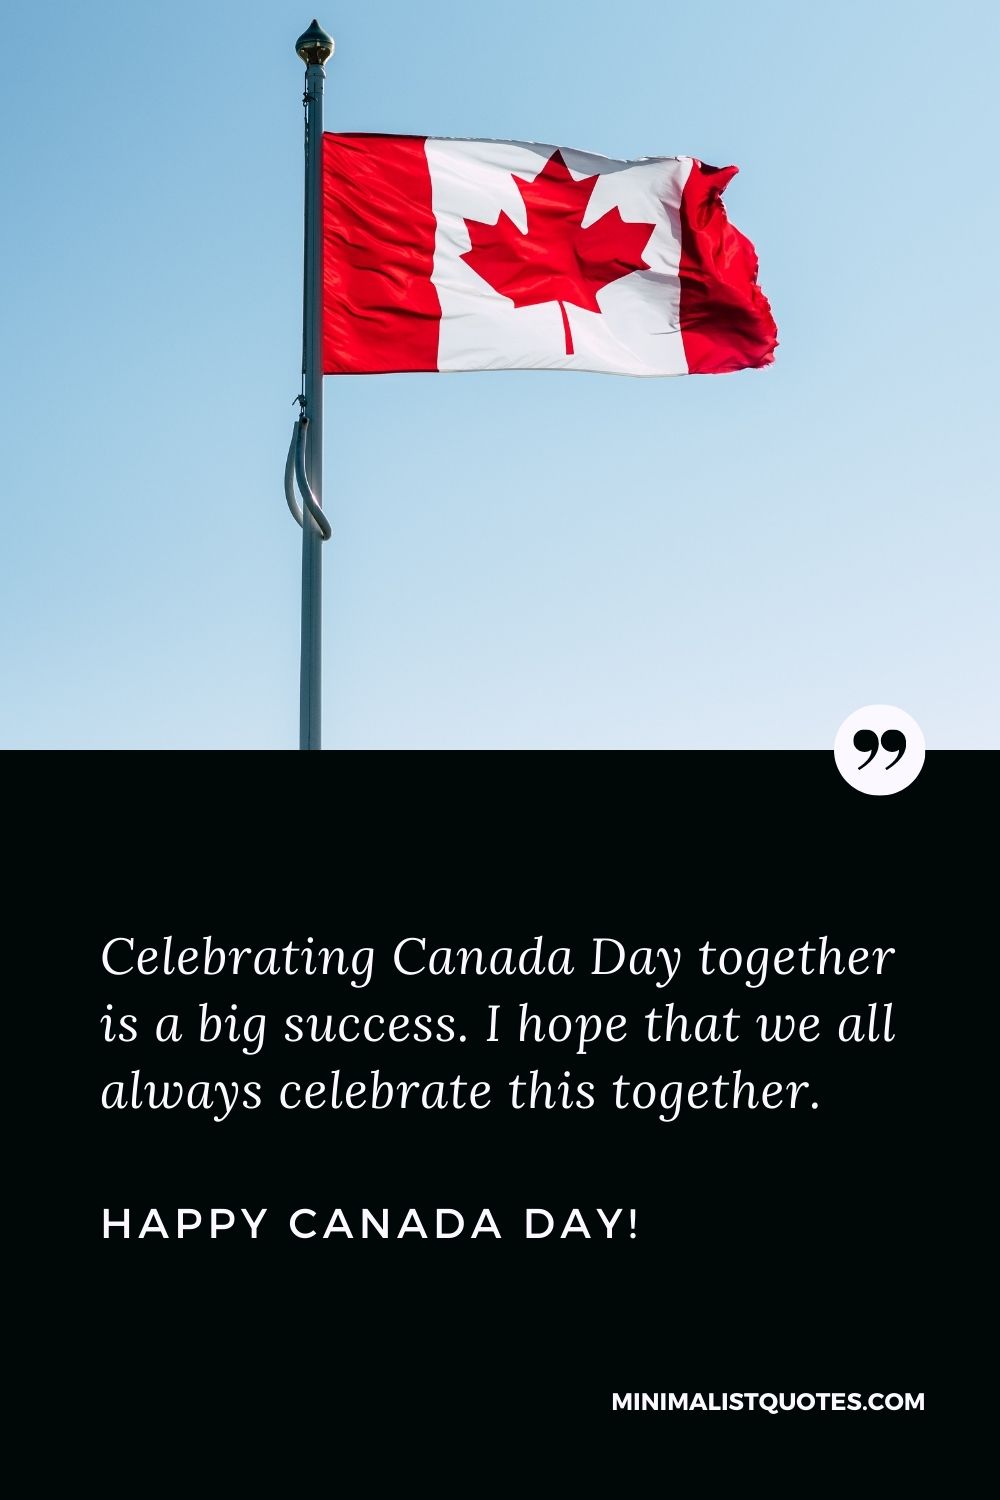 Canada day message: Celebrating Canada Day together is a big success. I hope that we all always celebrate this together. Happy Canada Day!